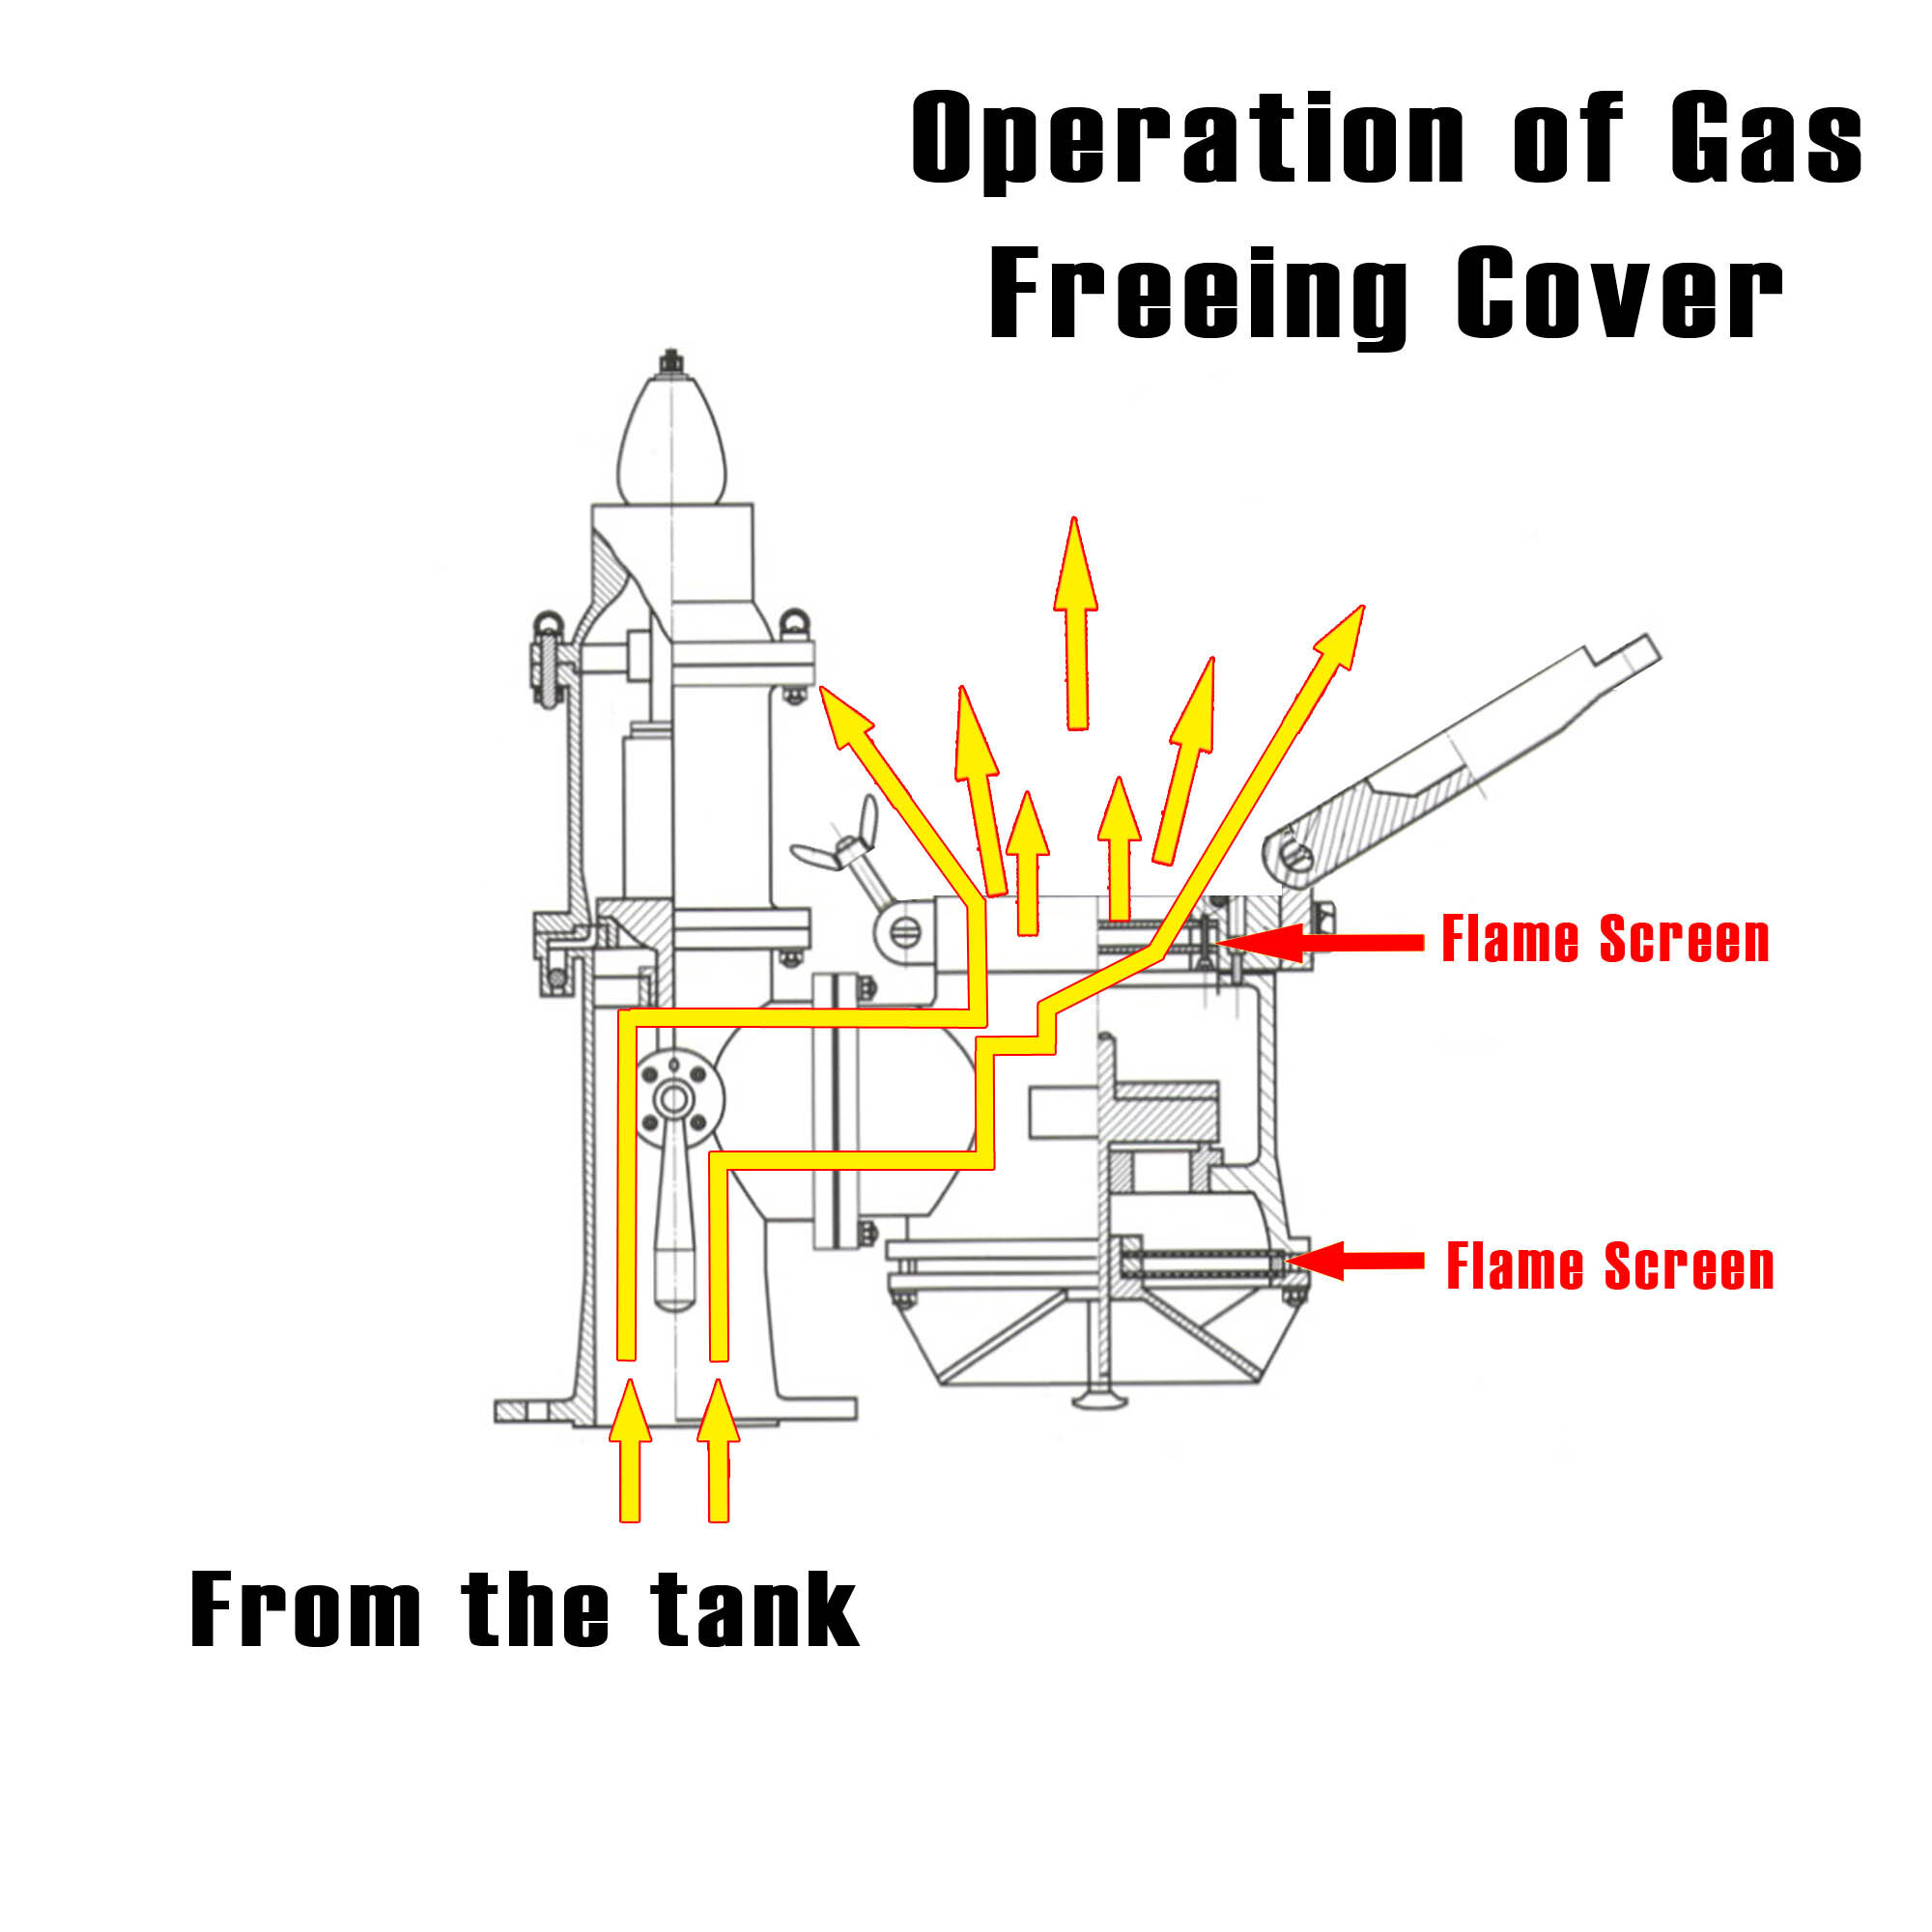 Operation of Gas Freeing Cover diagram as part of P/V Valves. The yellow arrows indicate the flow of air coming from inside the tank and going out to the gas freeing covers with flame screens.